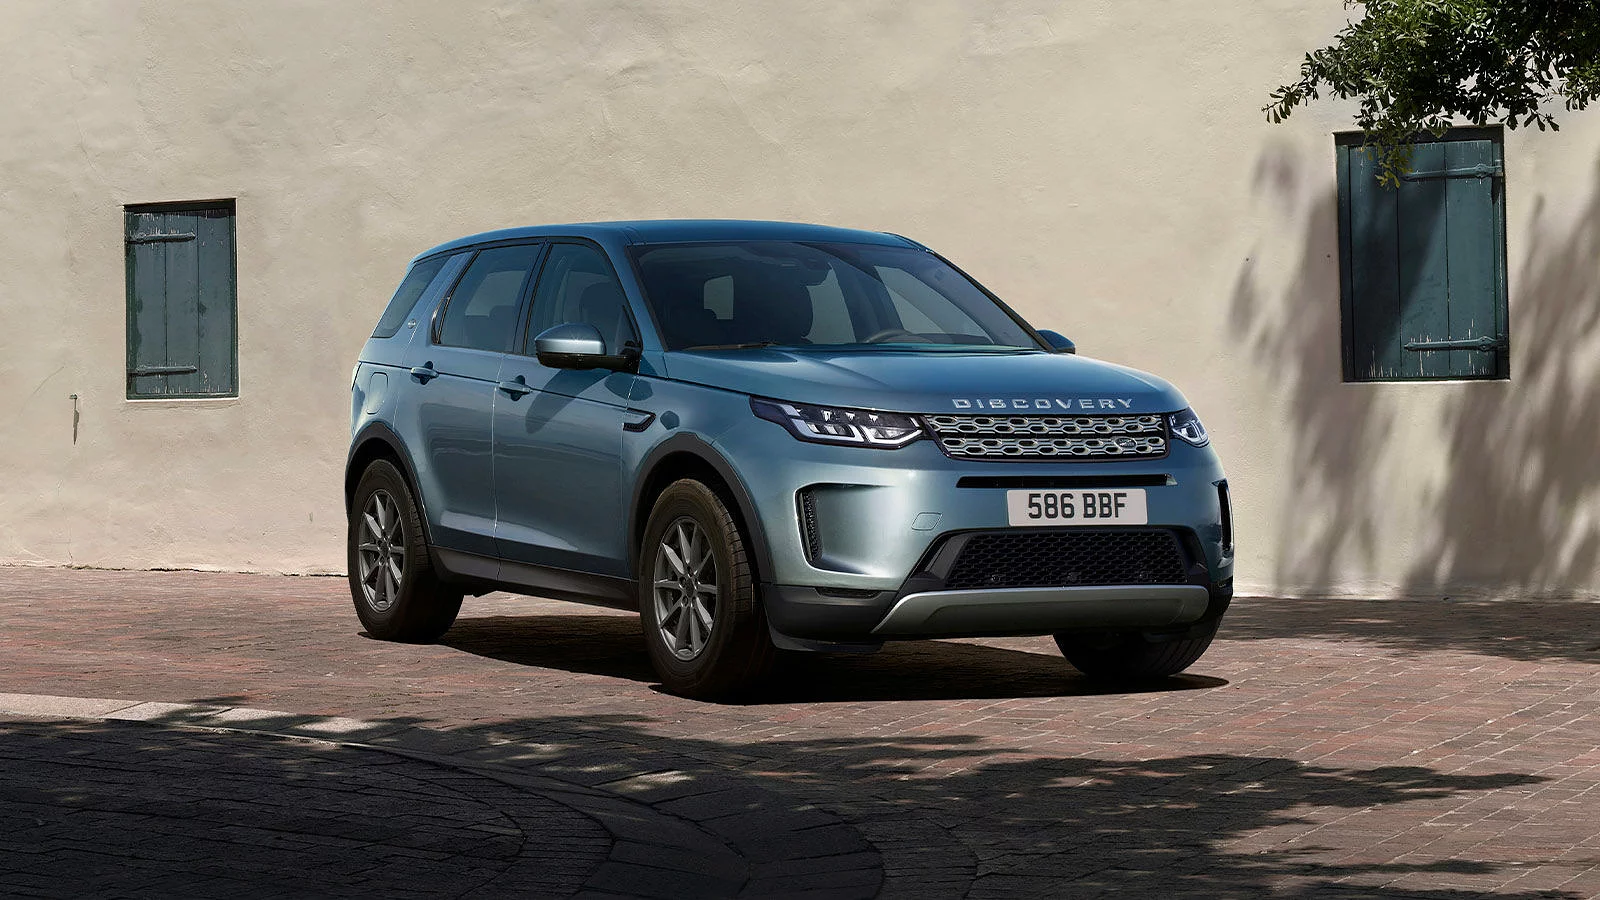 <span style="font-size:1.25rem">DISCOVERY SPORT</span><br>
MODELS